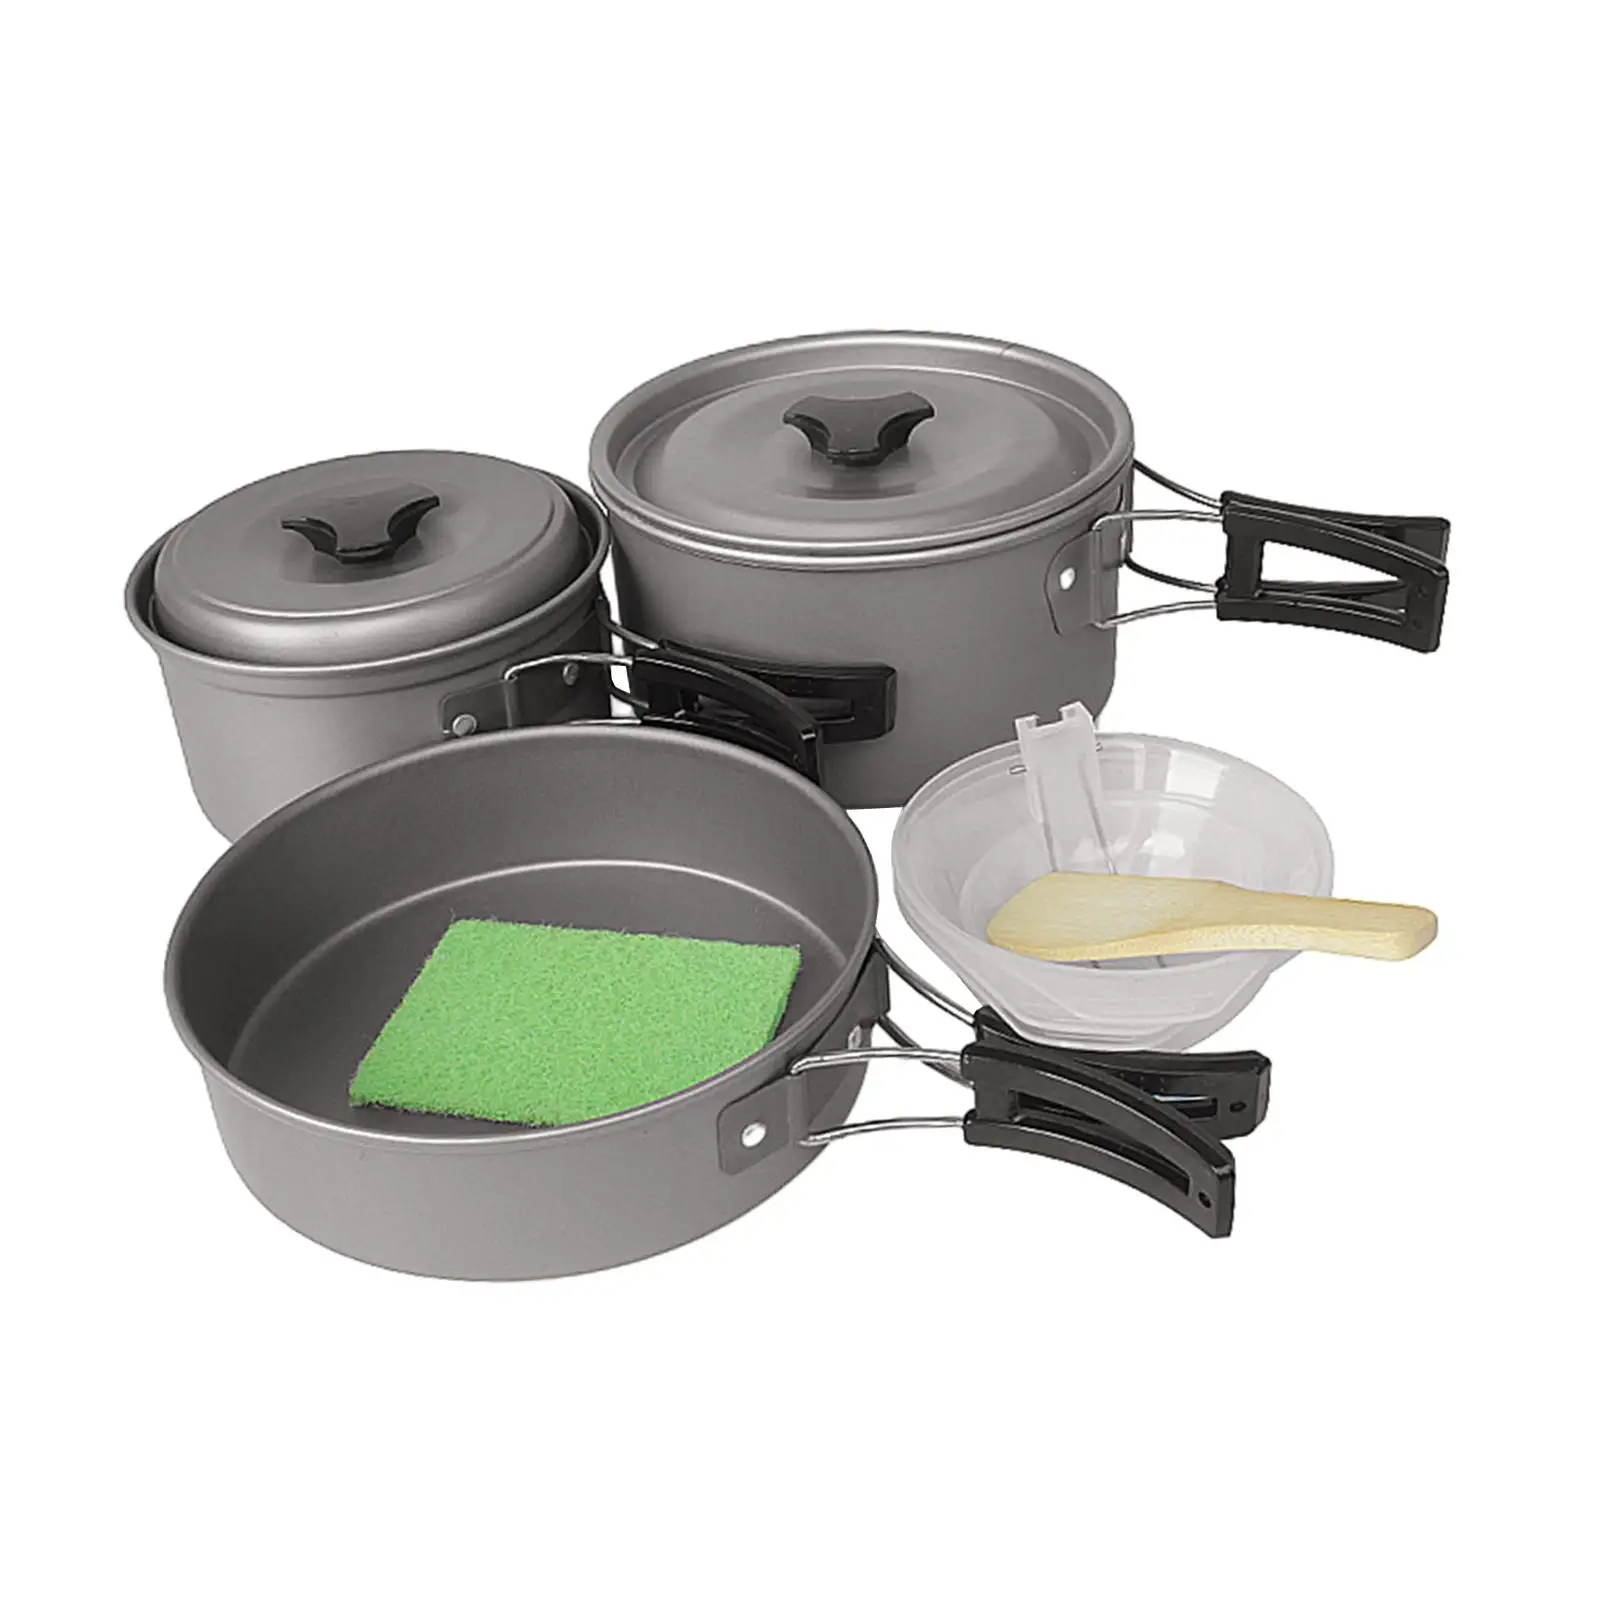 Camping Cookware Mess Set Cooking Pot Aluminum Alloy Portable Frying Pan Camping Cooking Set for Camp Outdoor Equipment Gear